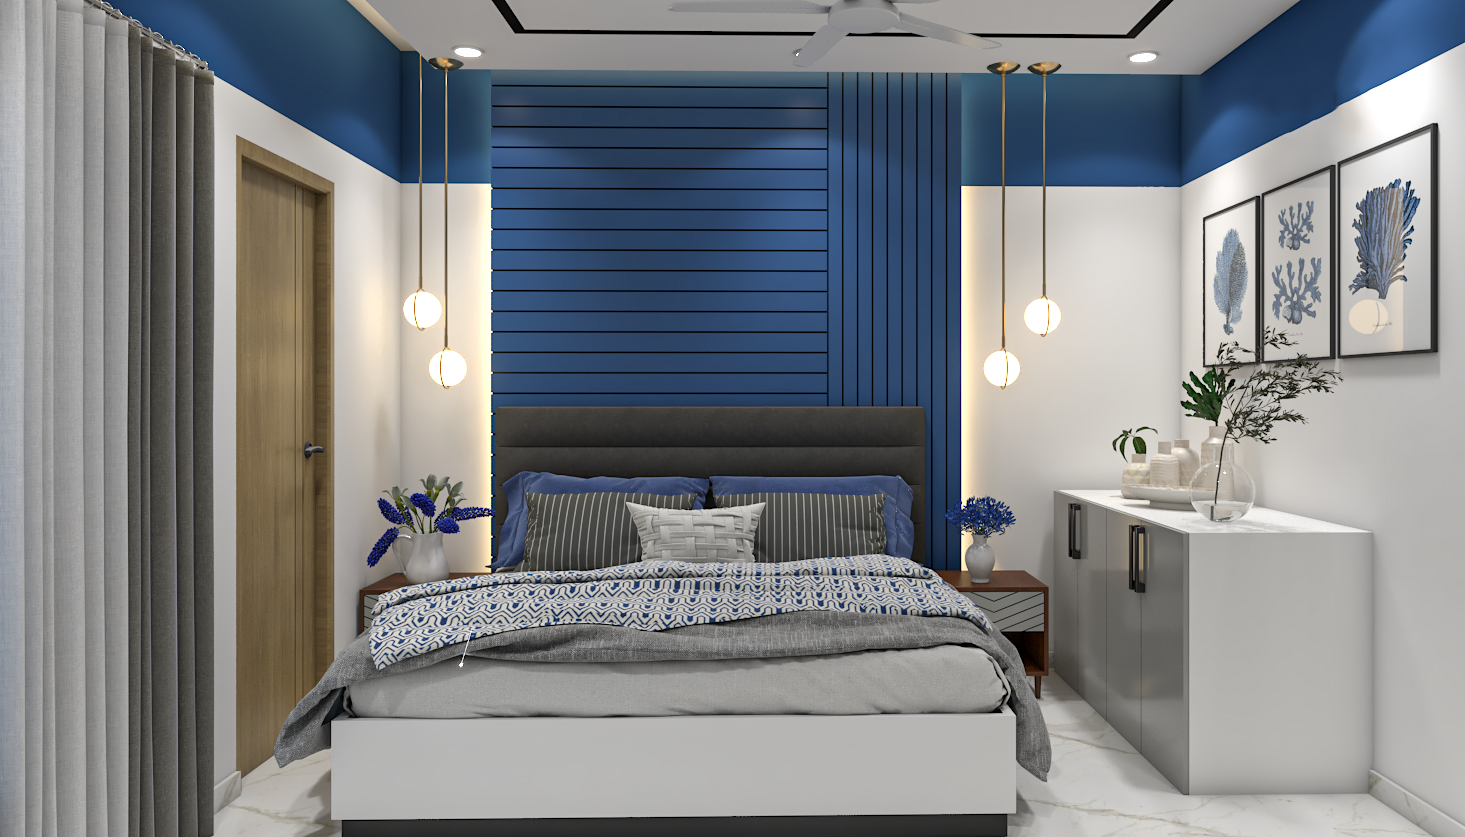 Contemporary Blue Kid's Bedroom Design With Wall-Mounted Unit